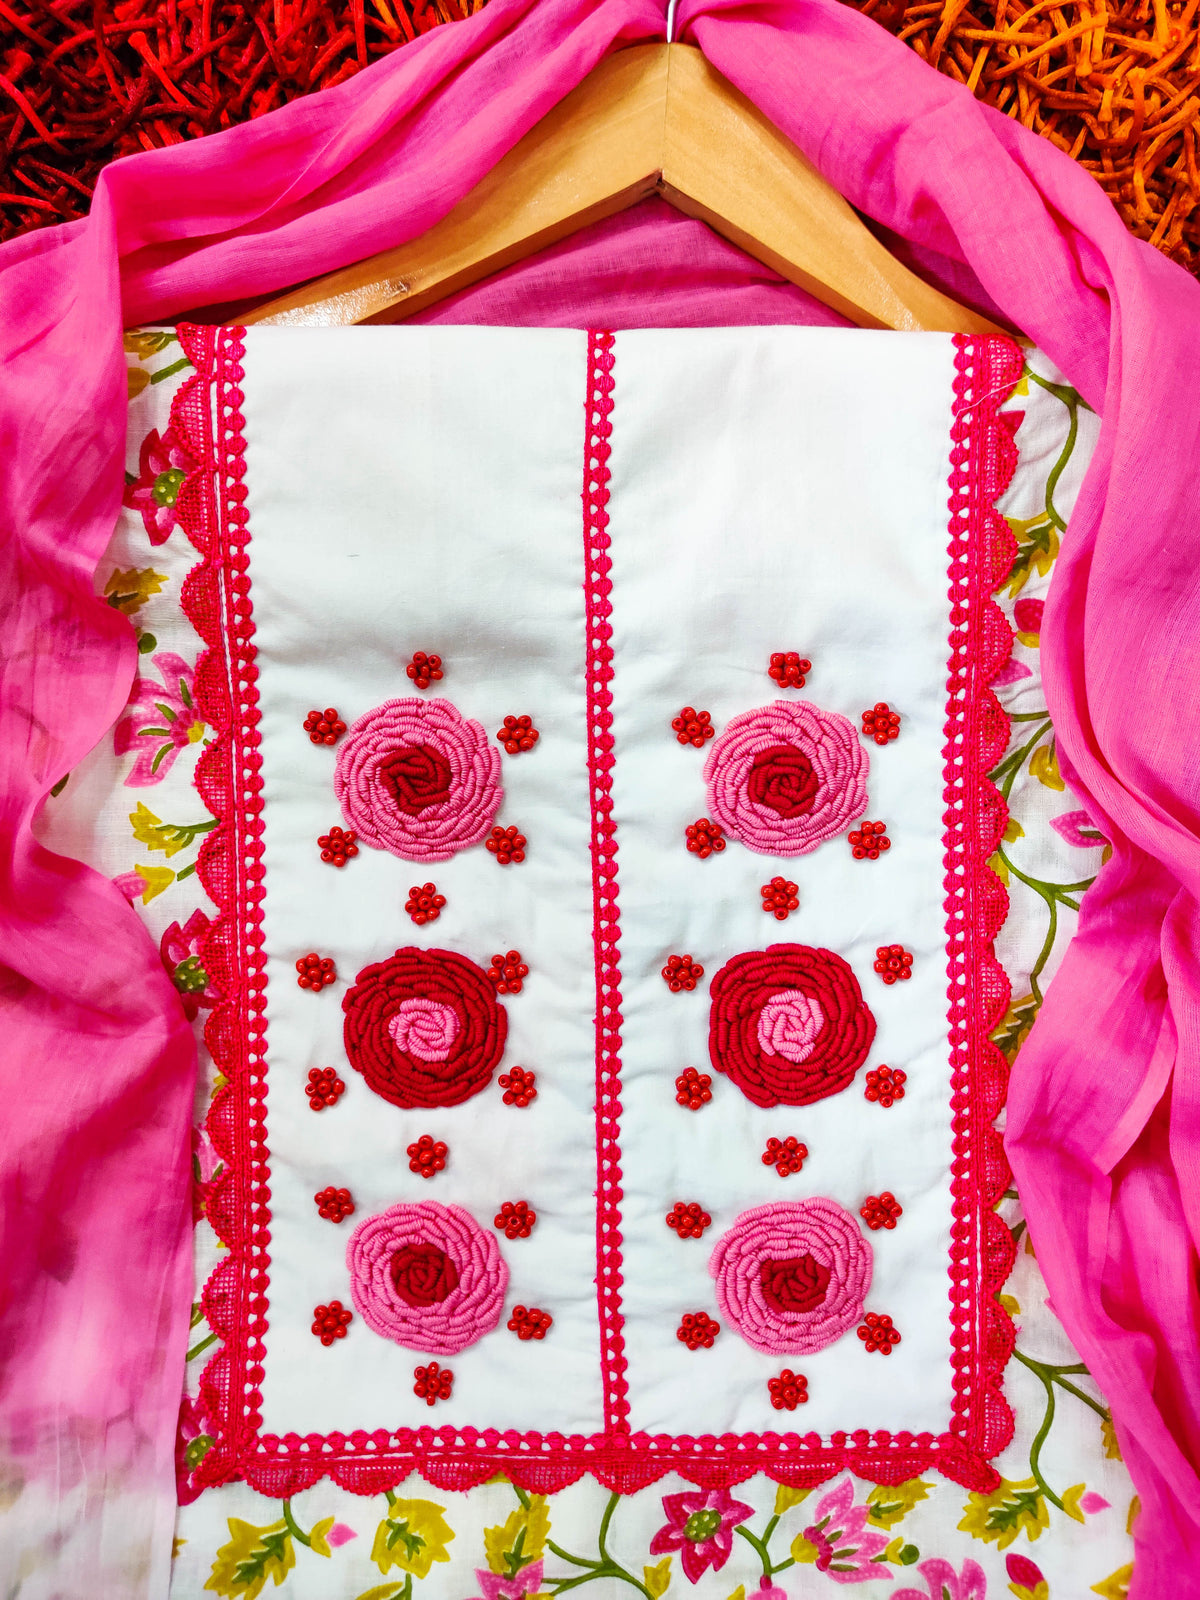 Floral Cotton Hand-Embroidered Patch Unstitched Dress Material Kurta Set with Magenta Lace Accents